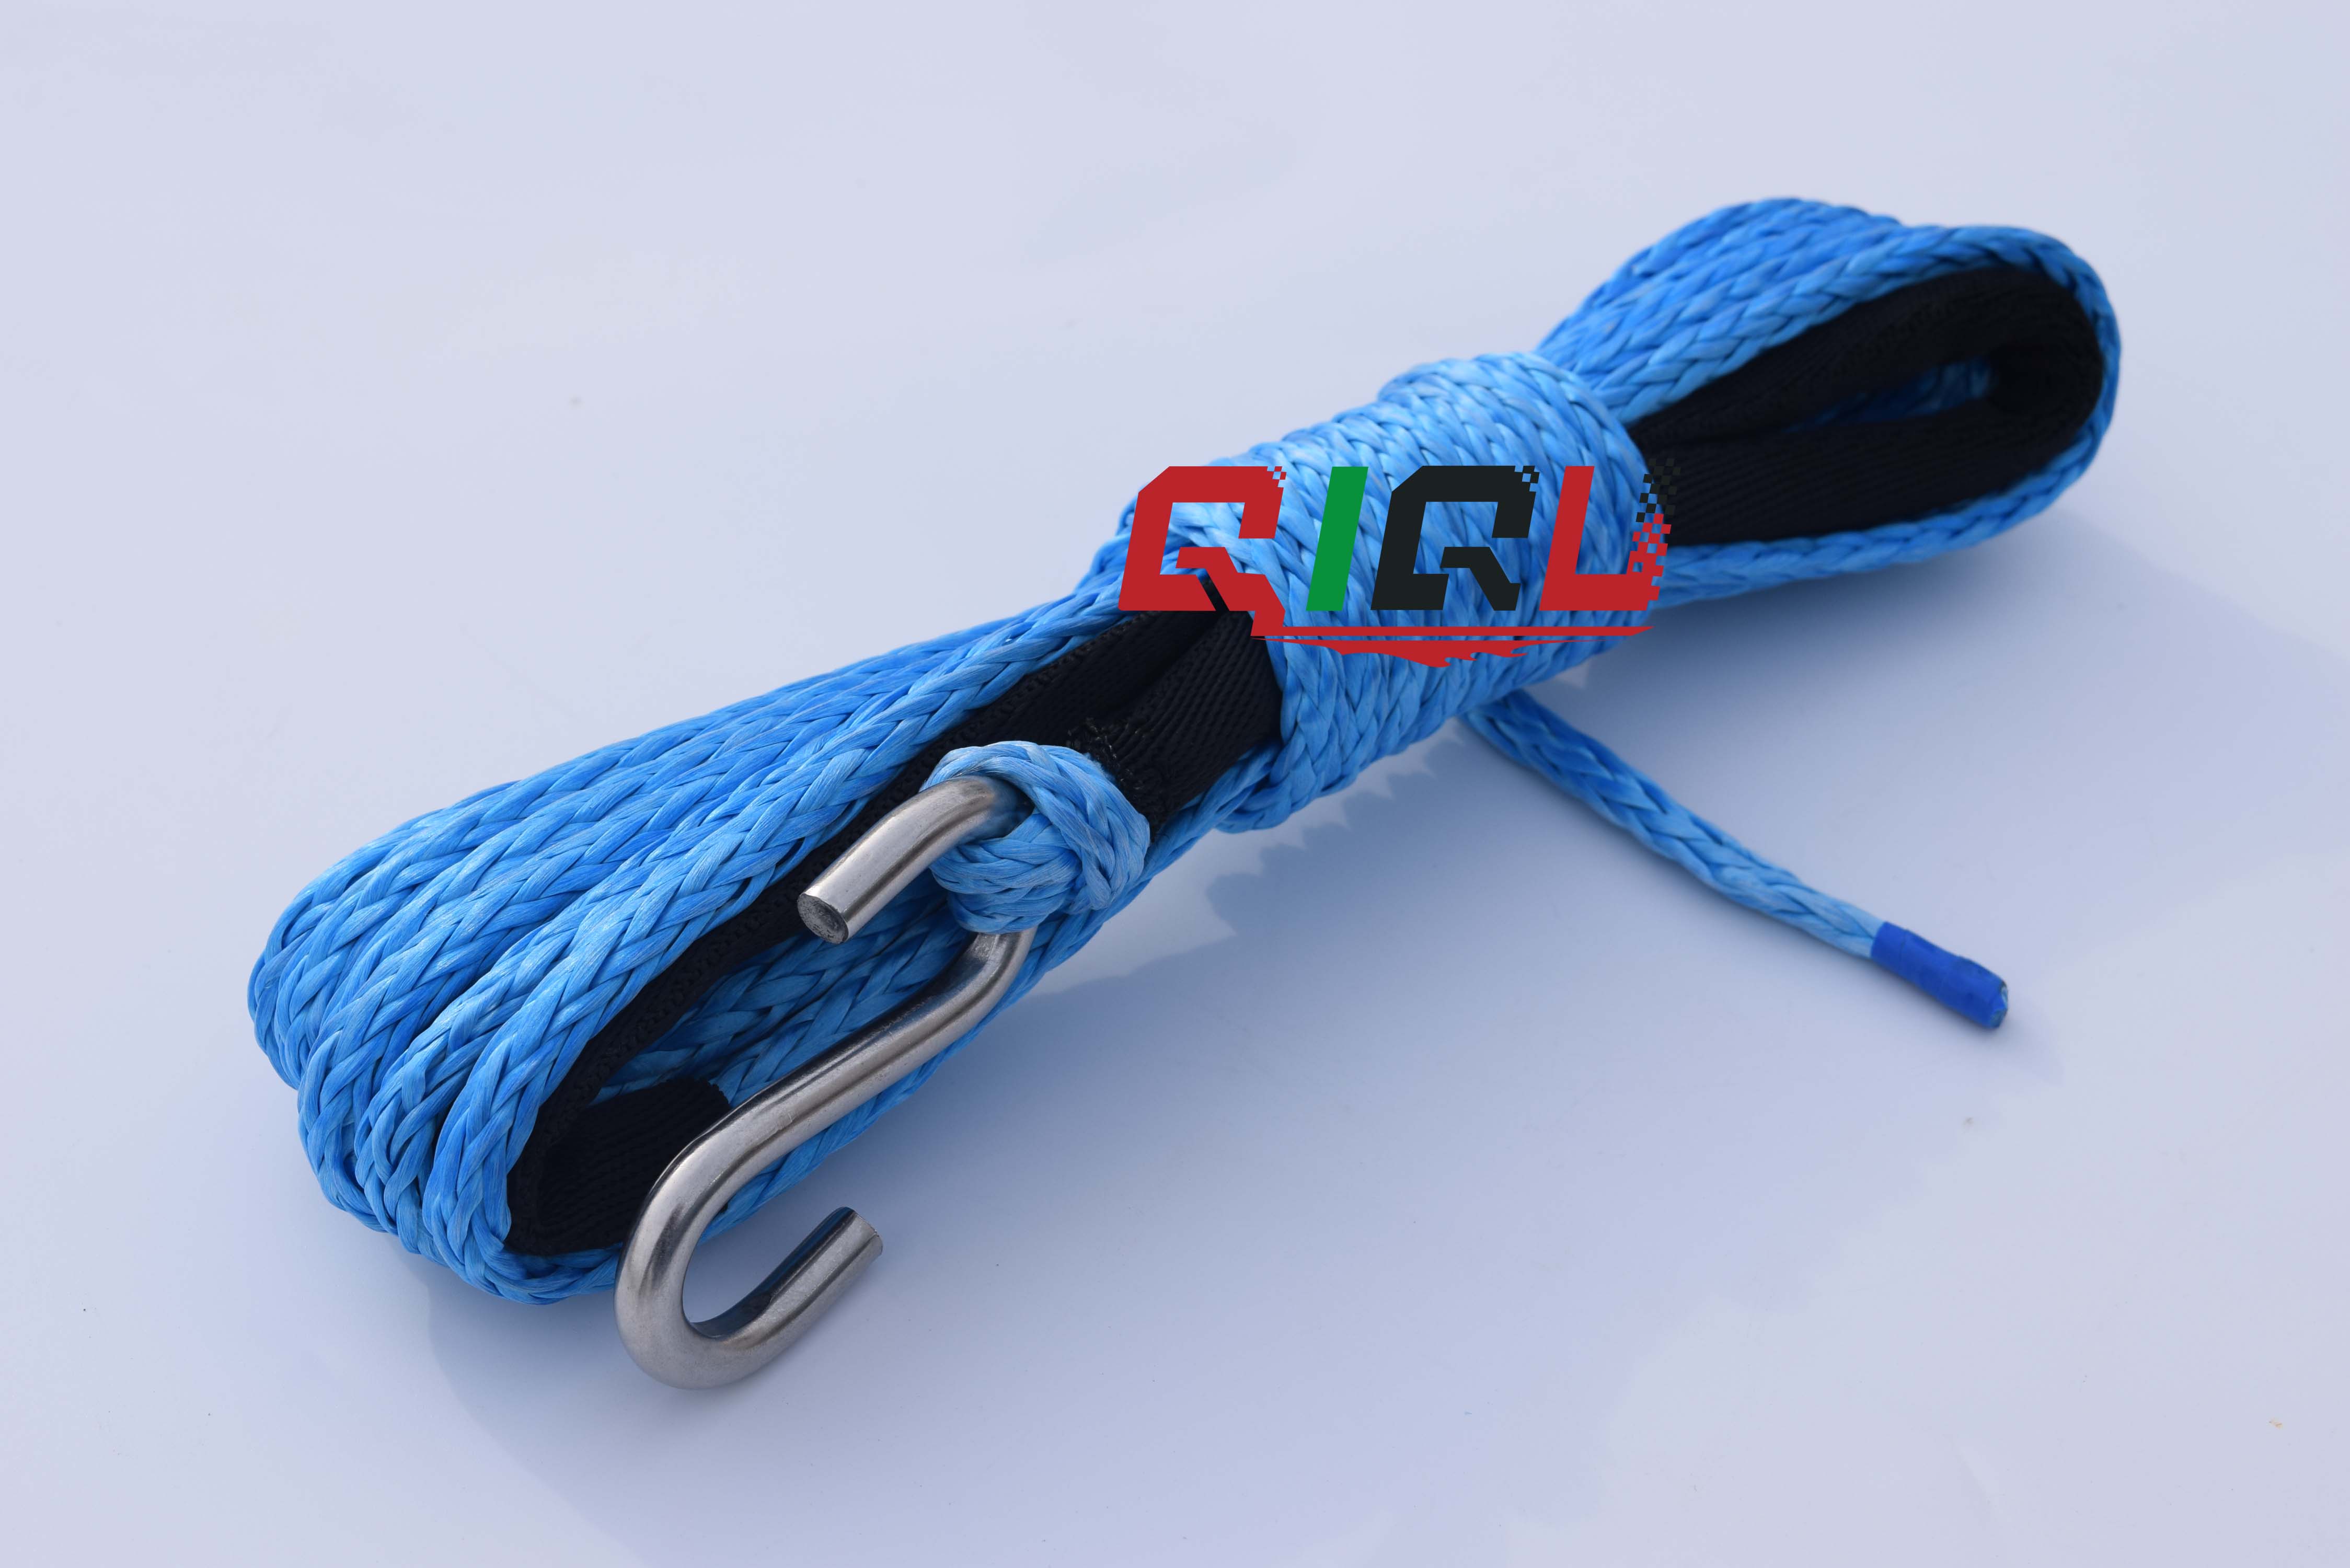 QIQU UHMWPE Trailer Winch Rope with S hook for Trailer Boat